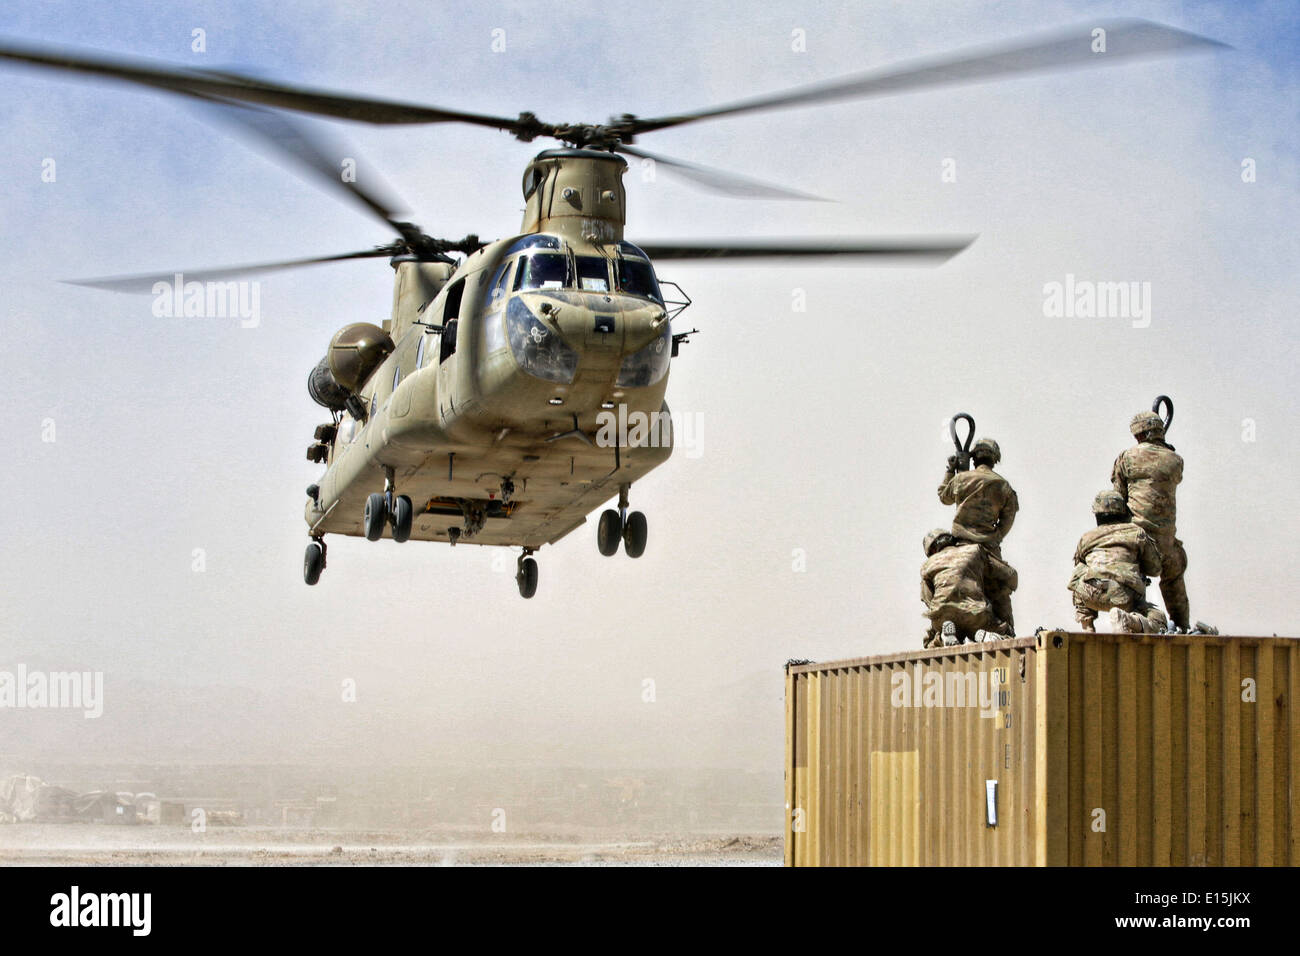 A US Army CH-47 Chinook helicopter load team prepares to hook up a container to be airlifted June 18, 2013 in Uruzgan province, Afghanistan. The equipment is being moved to Kandahar Airfield as FOB Hadrian shuts down. Stock Photo